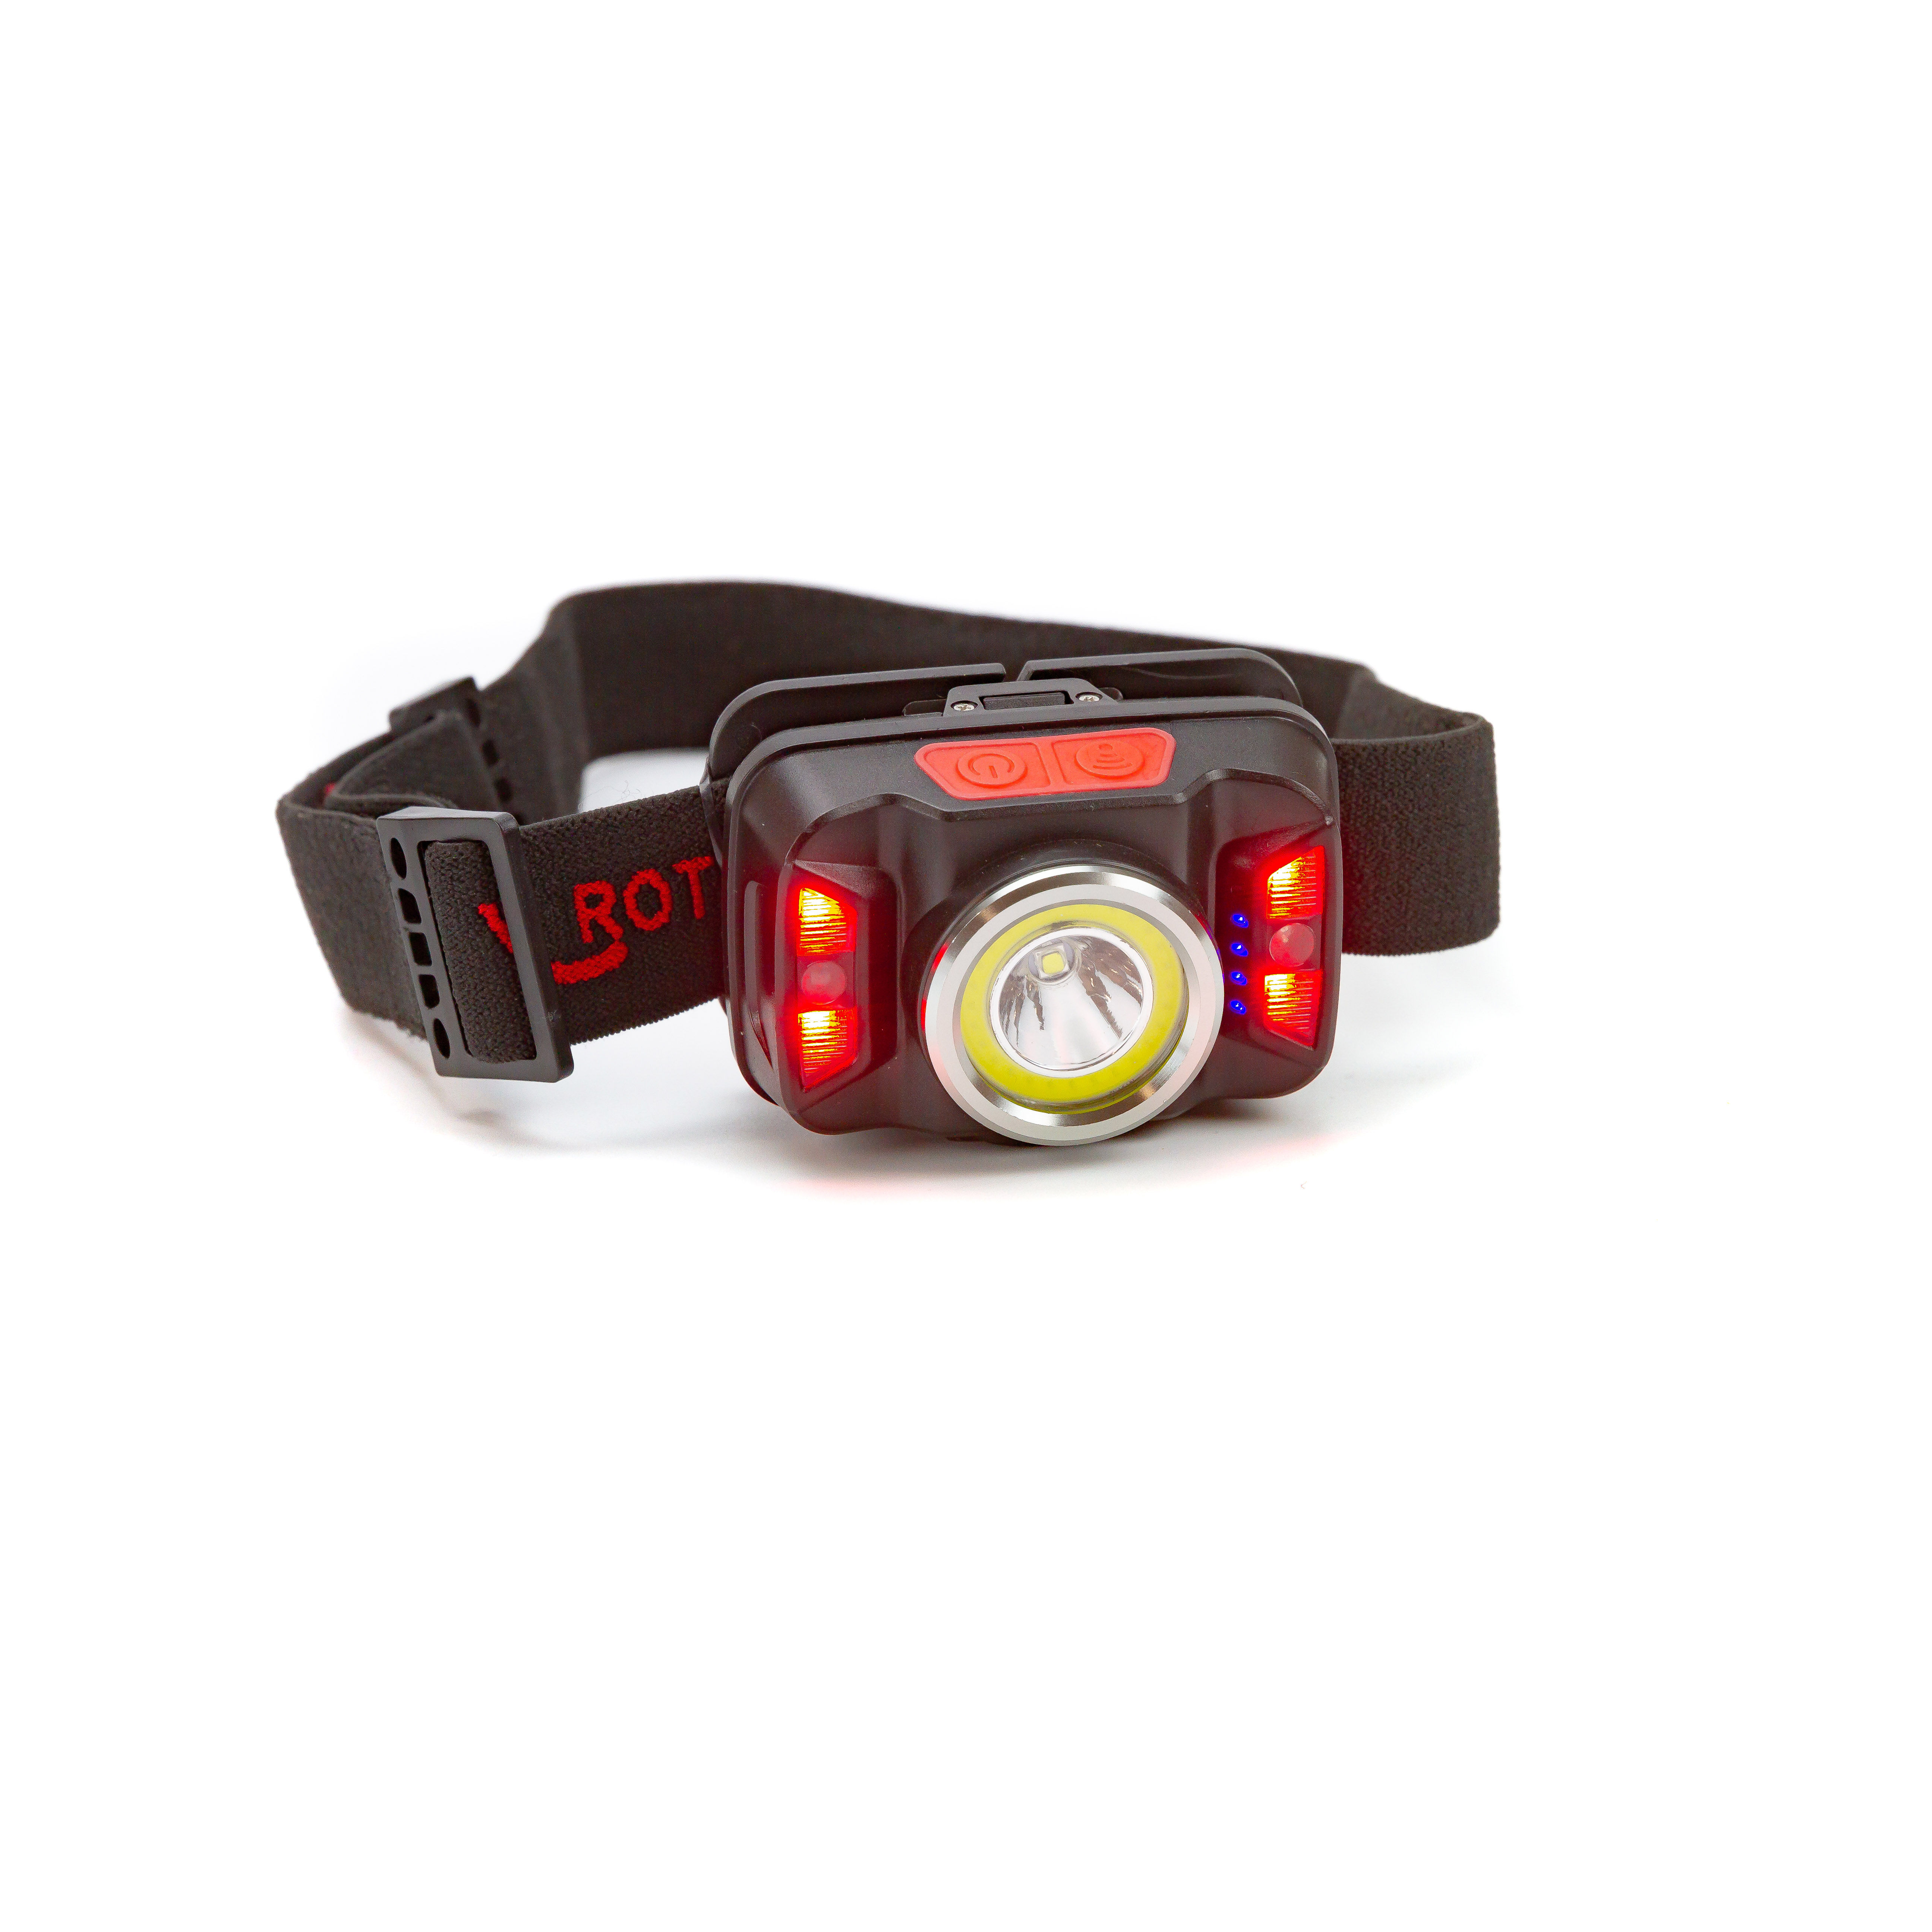 Rothenberger ROH320 Head Torch with Motion Sensor - 1500003816